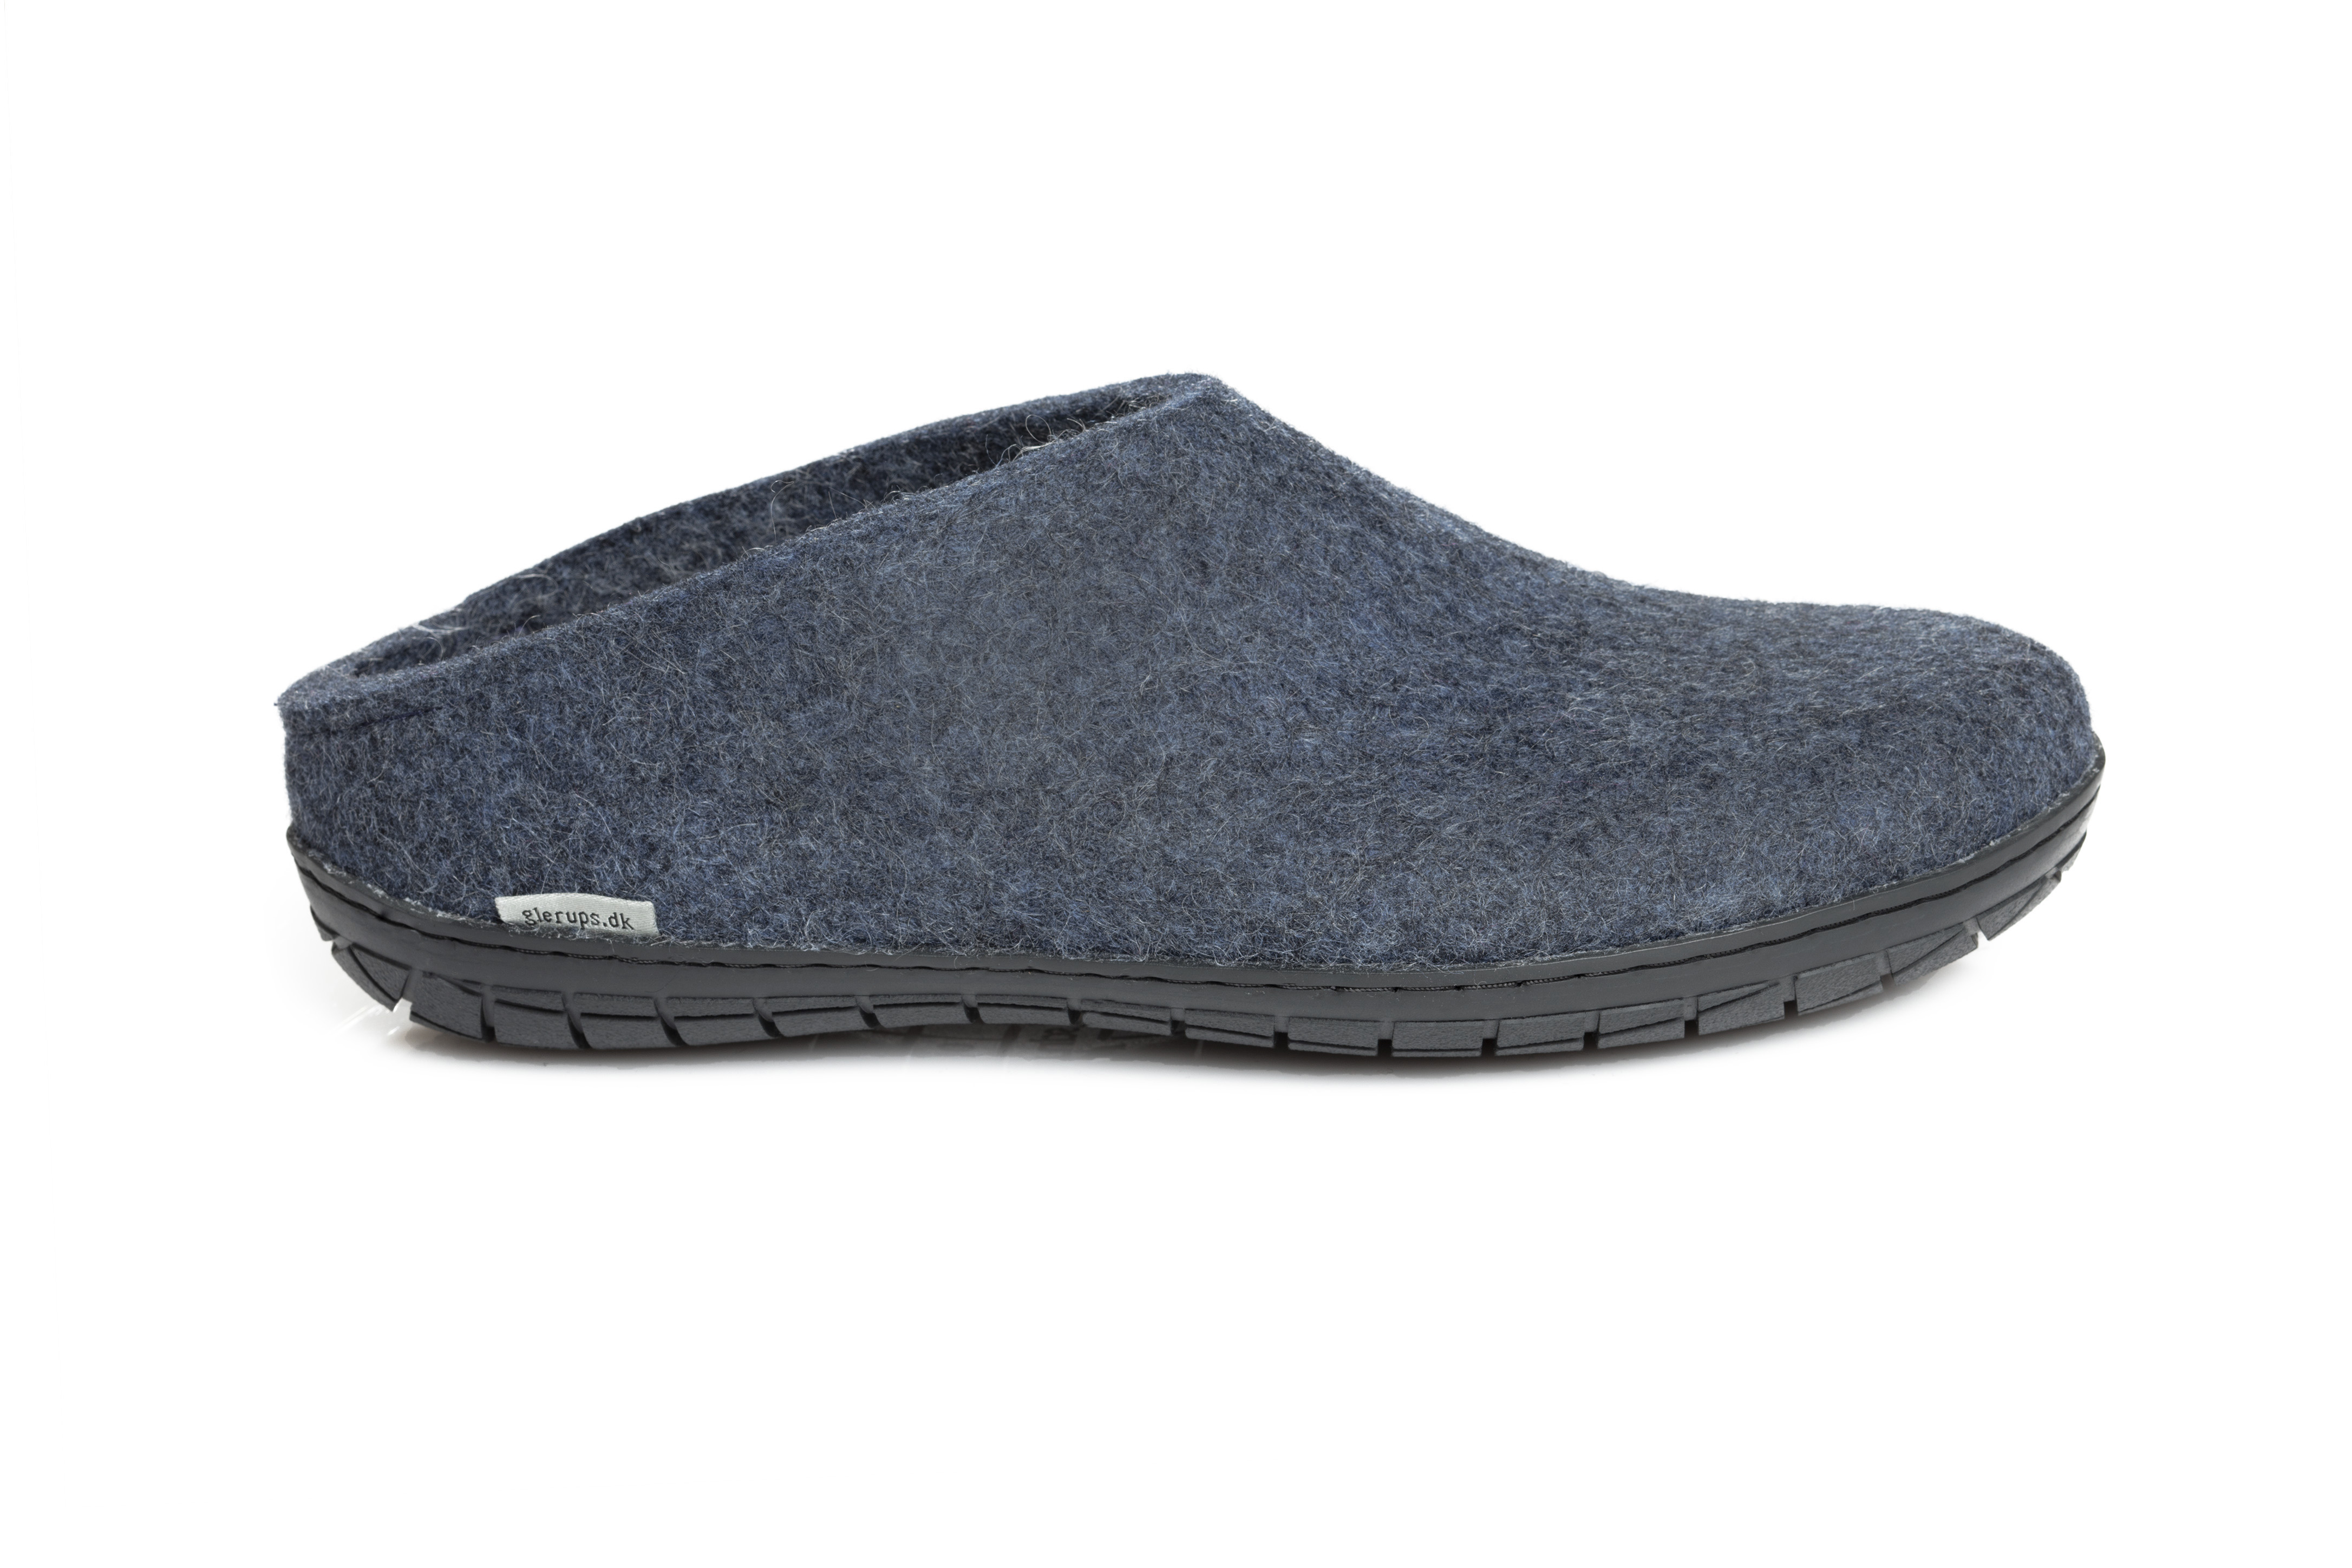 felt slippers with rubber soles